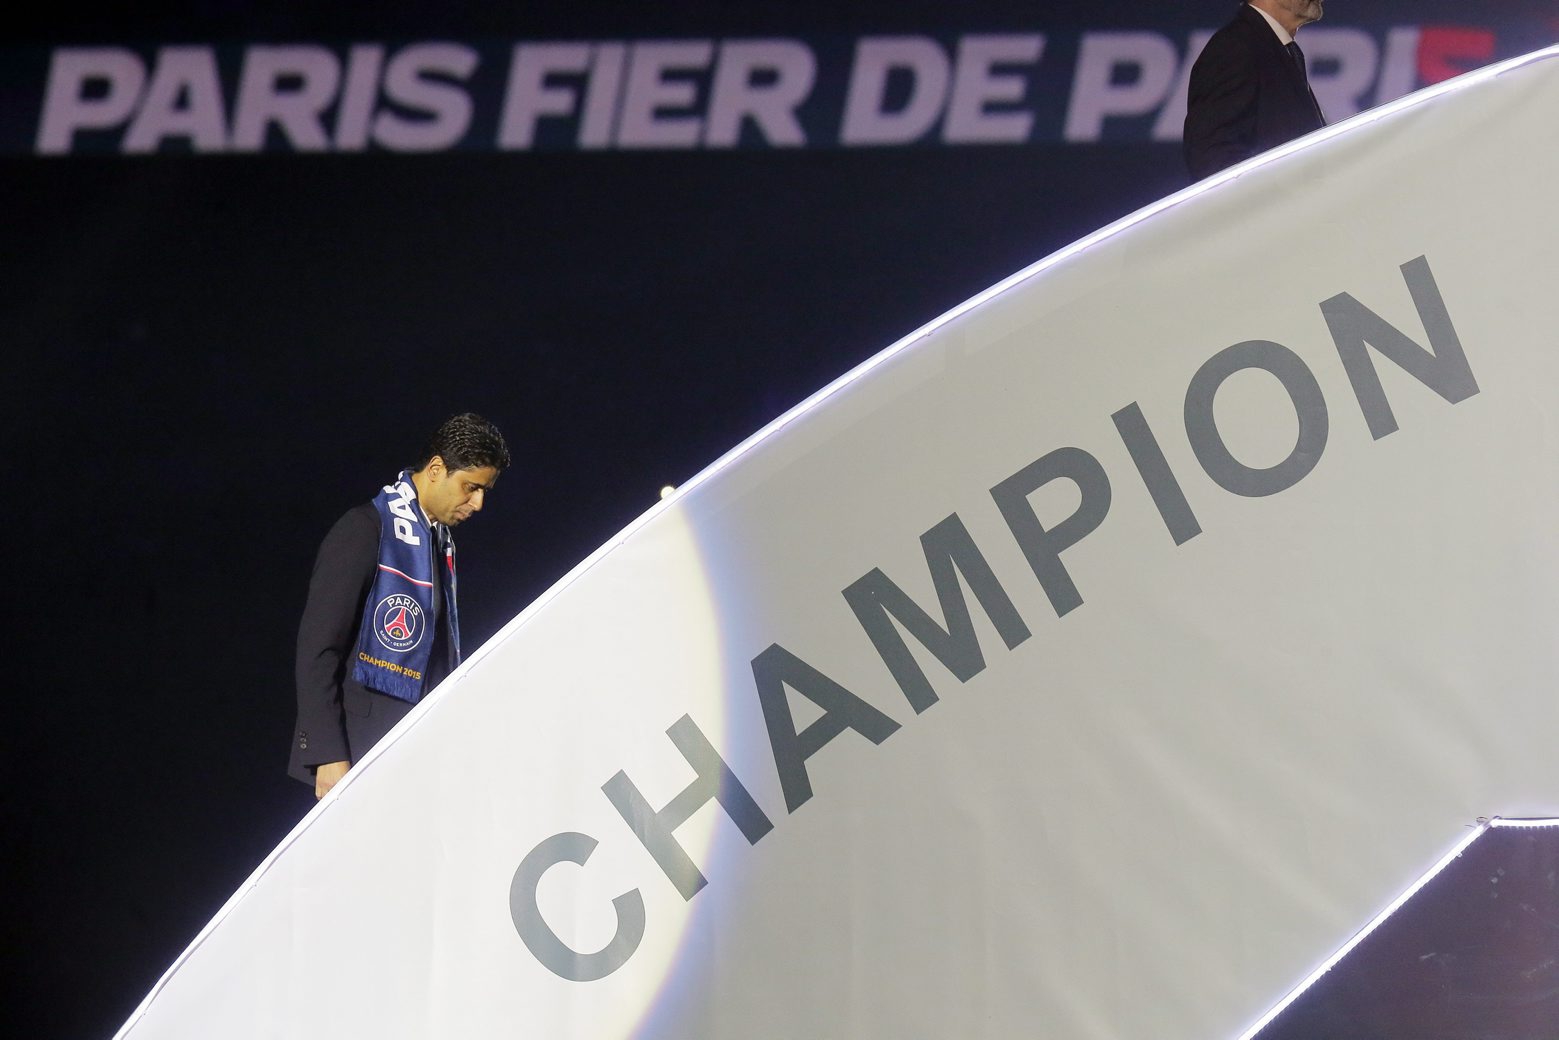 FILE - In this Saturday, May 23, 2015 file photo Nasser Al-Khelaifi walks on to the podium after winning the French League One title at the end of the French L1 football match Paris Saint-Germain (PSG) and Reims, at the Parc des Princes Stadium, in Paris. Paris Saint-Germain president Nasser al-Khelaifi was charged Thursday Feb. 20, 2020 by Swiss federal prosecutors in connection with a wider bribery investigation linked to World Cup television rights. (AP Photo/Jacques Brinon, File) Soccer FIFA Investigation Al-Khelaifi